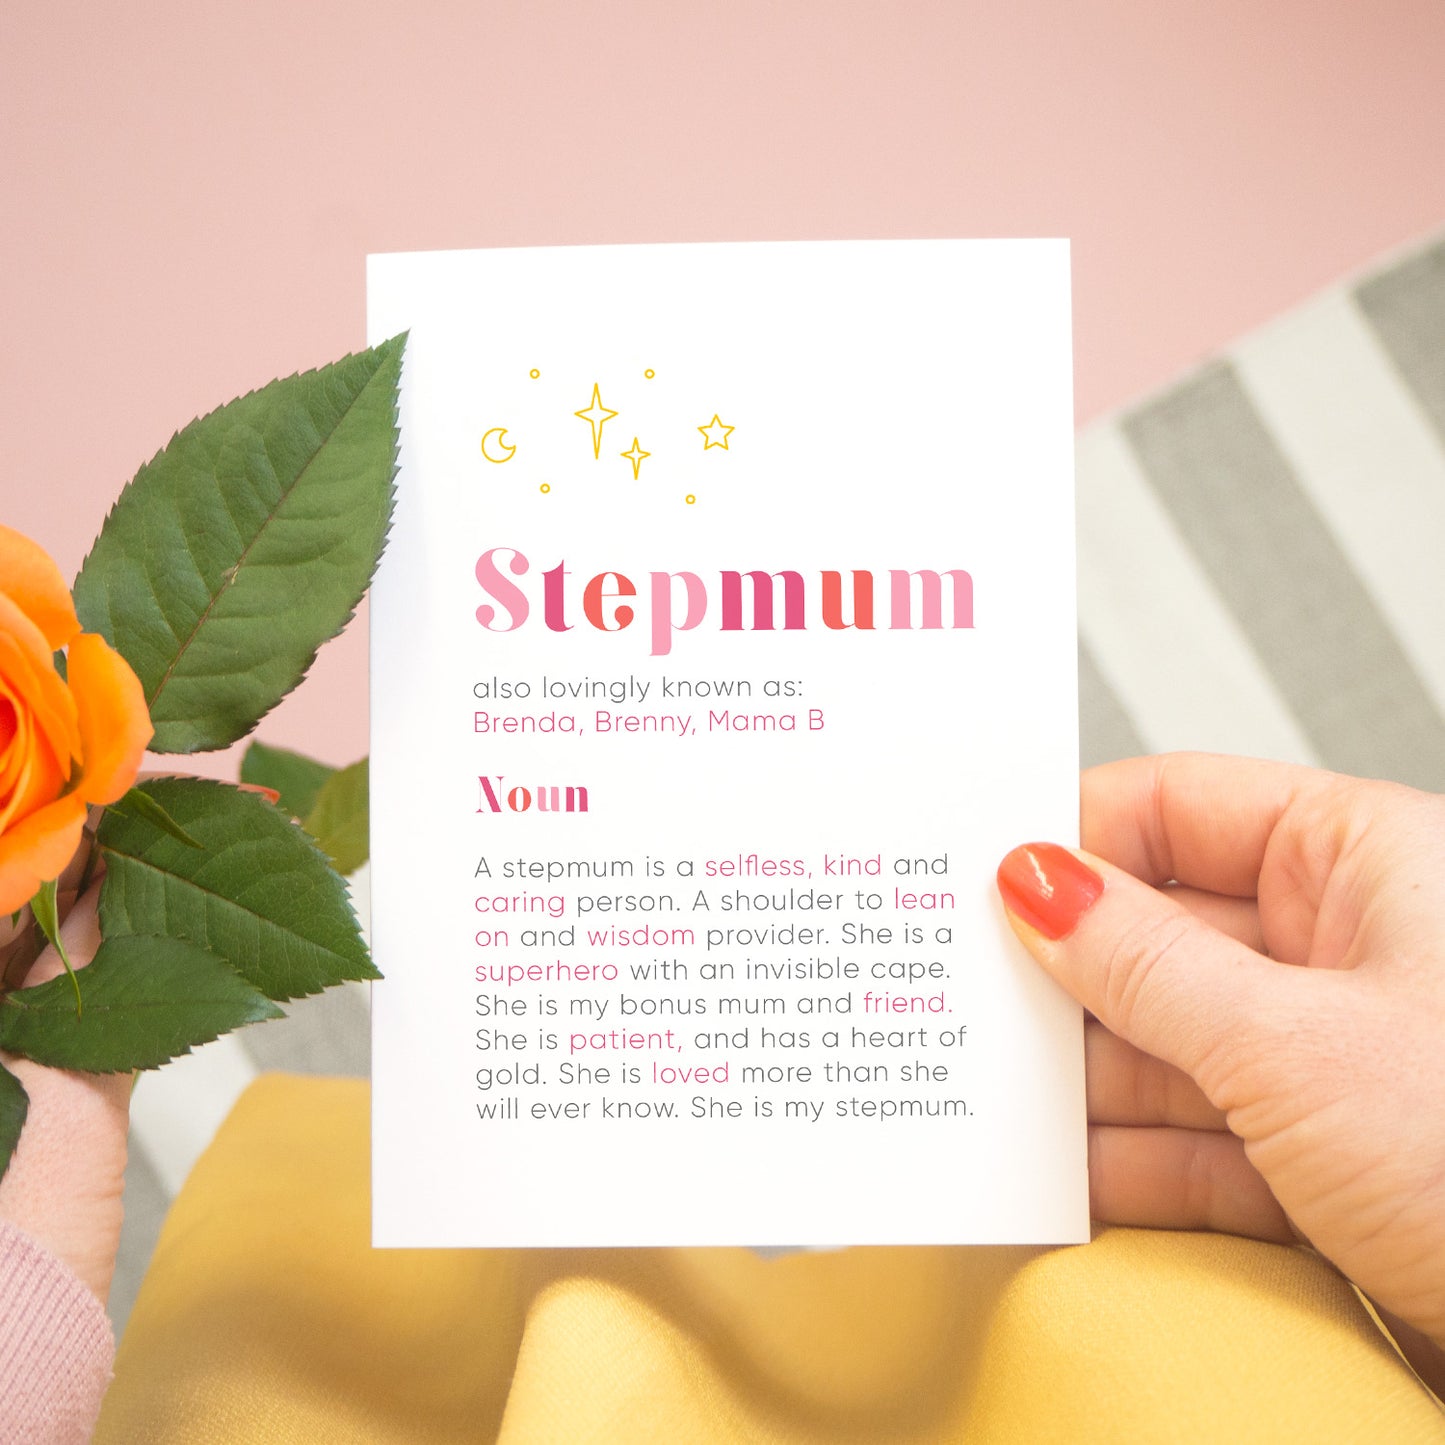 A personalised Stepmum dictionary definition card being held over a pink background with a grey and white striped rug, yellow skirt and a single orange rose to the left. The card features hand drawn writing in varying tones of pink and a definition of what a Stepmum is with key words highlighted in pink.